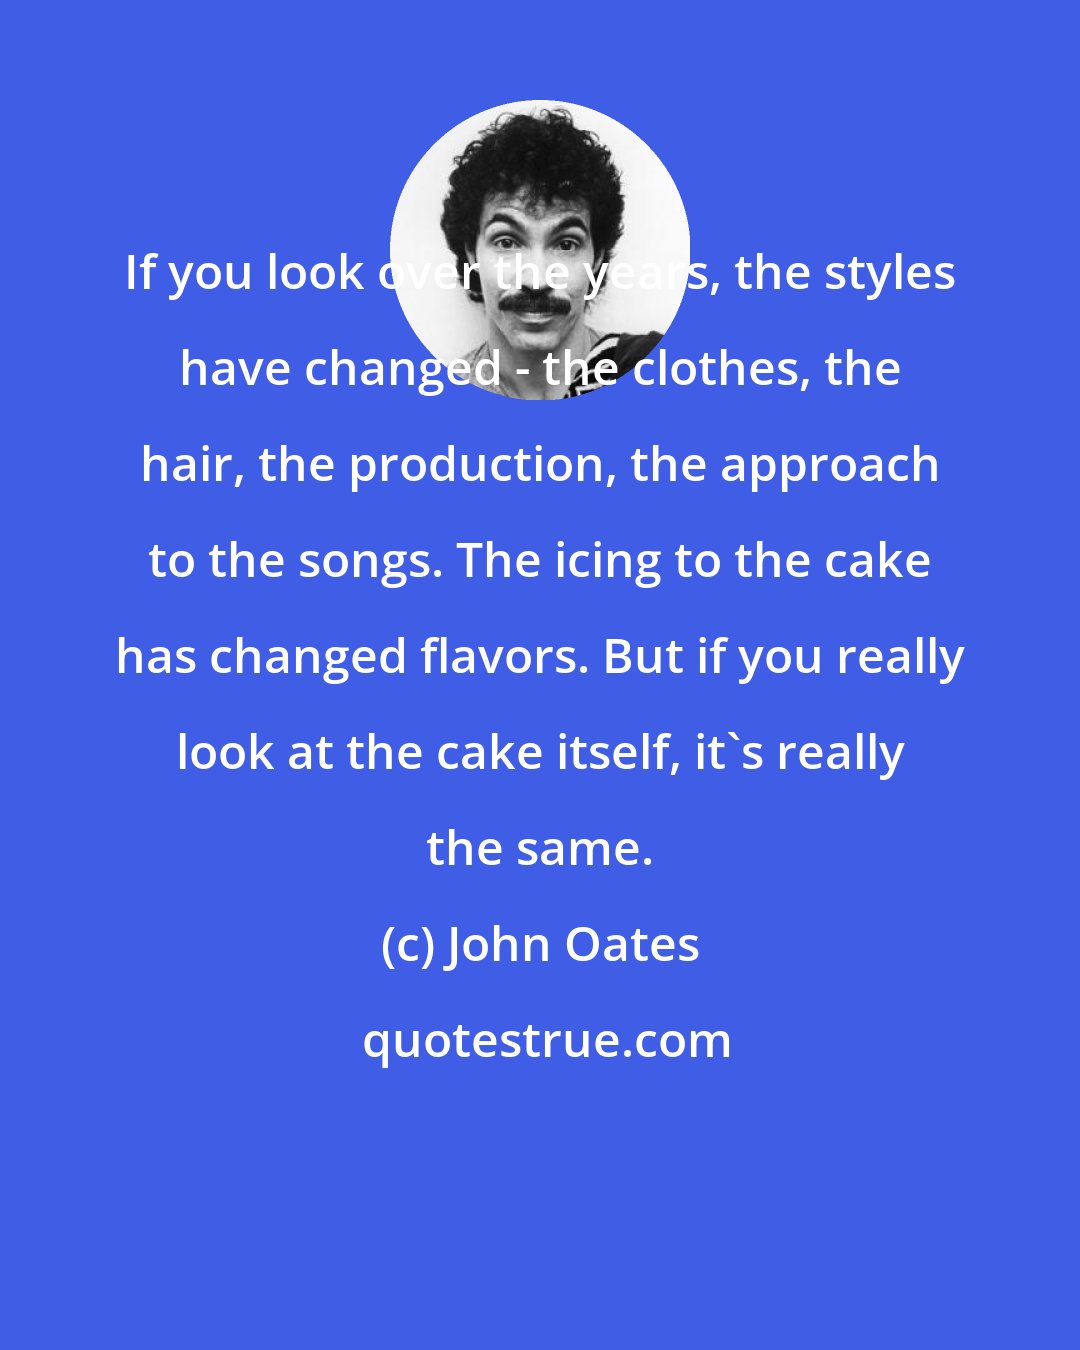 John Oates: If you look over the years, the styles have changed - the clothes, the hair, the production, the approach to the songs. The icing to the cake has changed flavors. But if you really look at the cake itself, it's really the same.